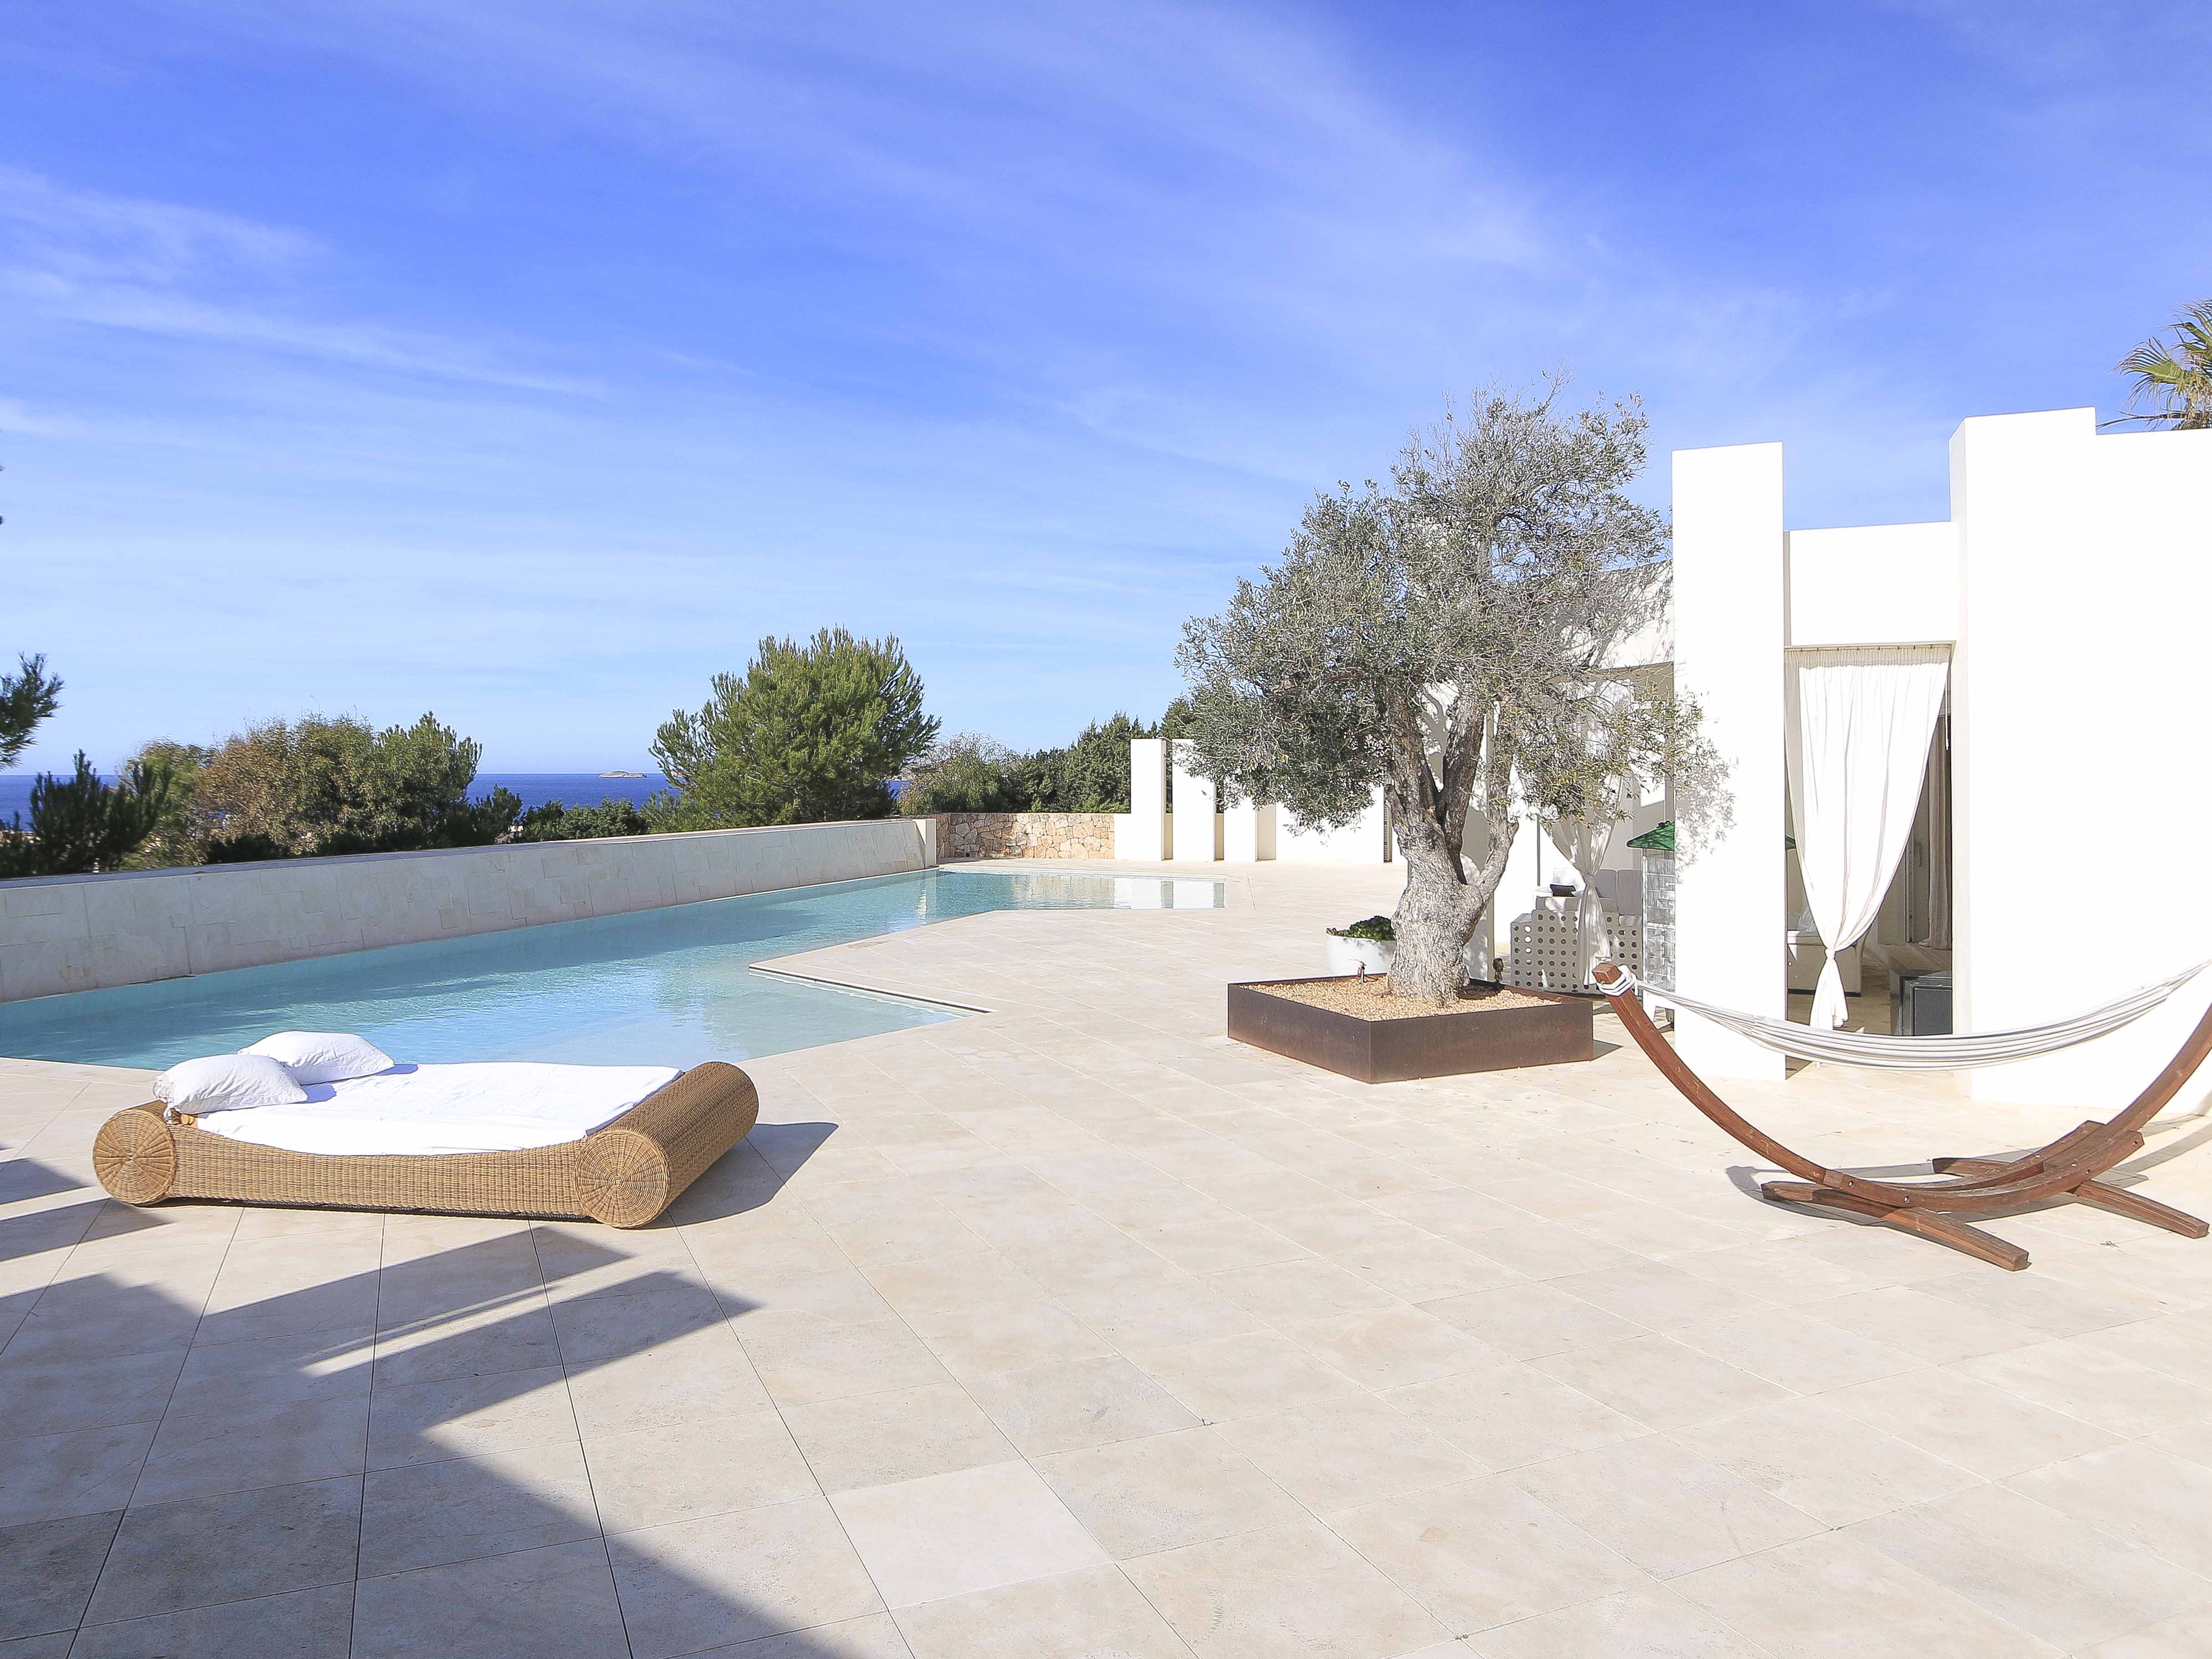 Villa with sunset views and access to the sea